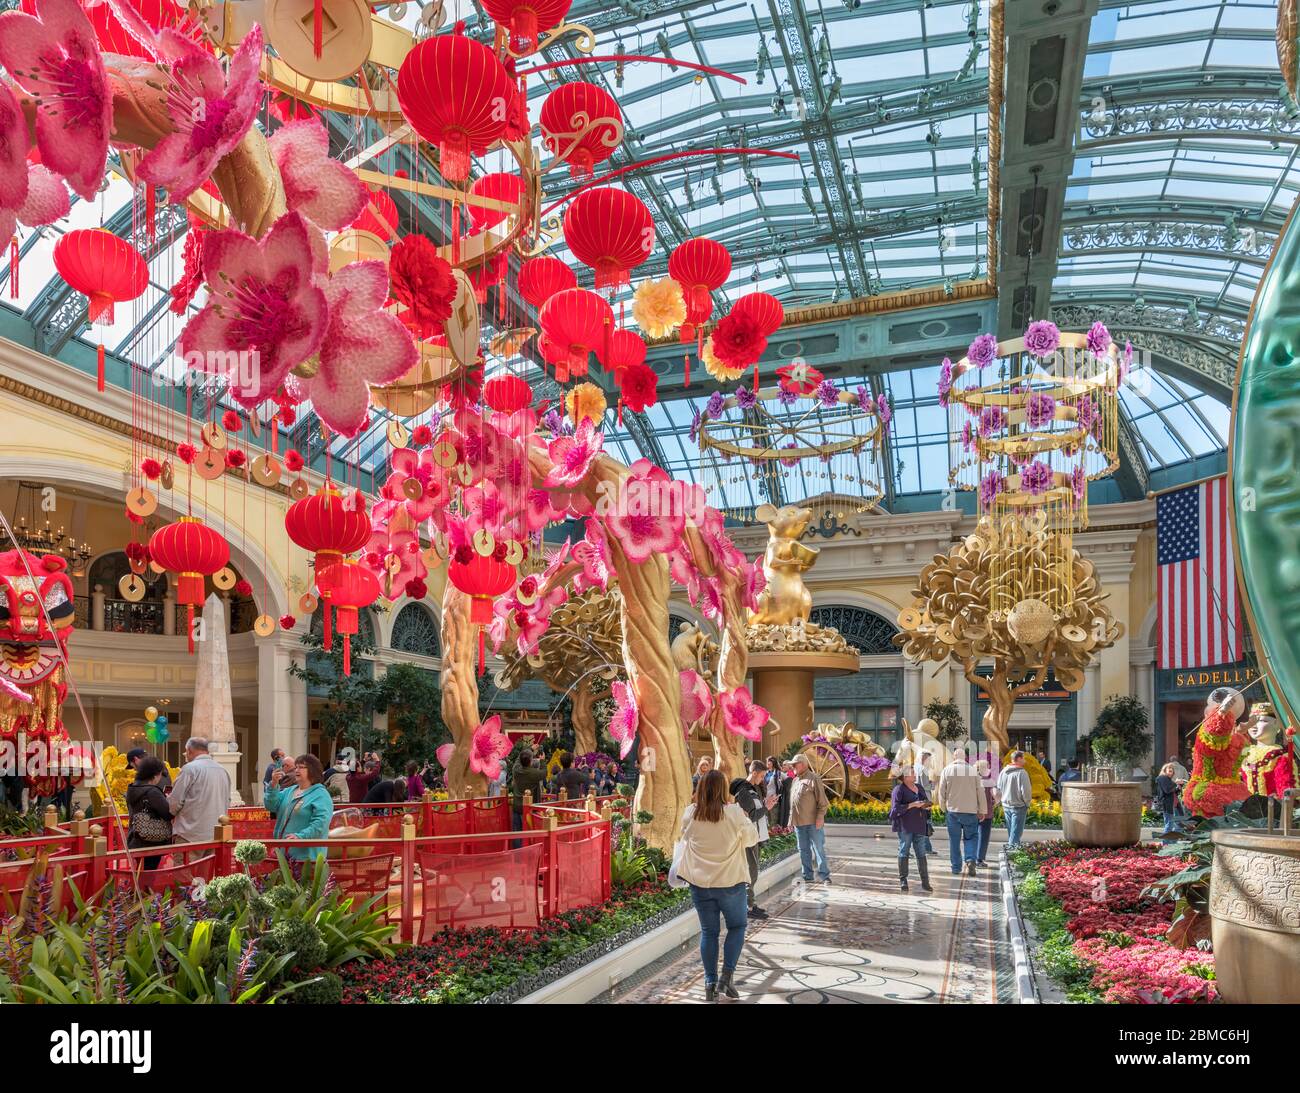 Bellagio Conservatory & Botanical Gardens decorated for Chinese New